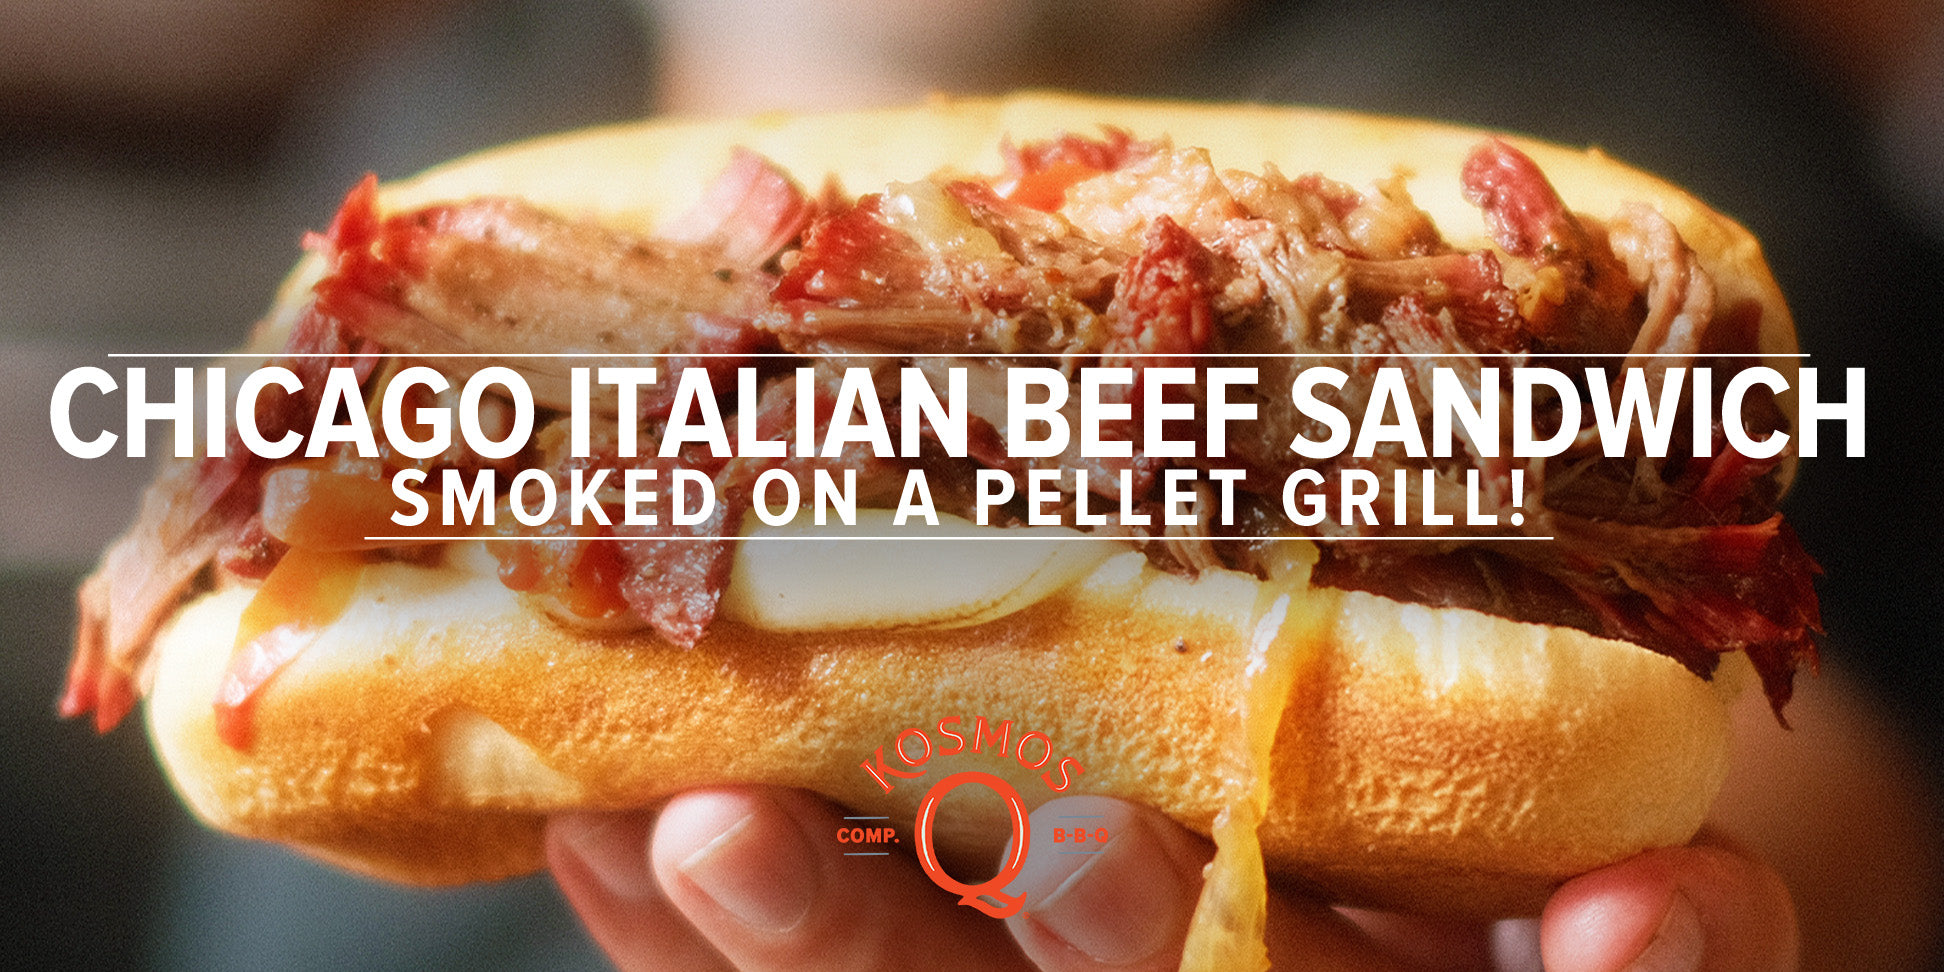 Smoked Chicago Italian Beef Sandwich on a Pellet Grill?